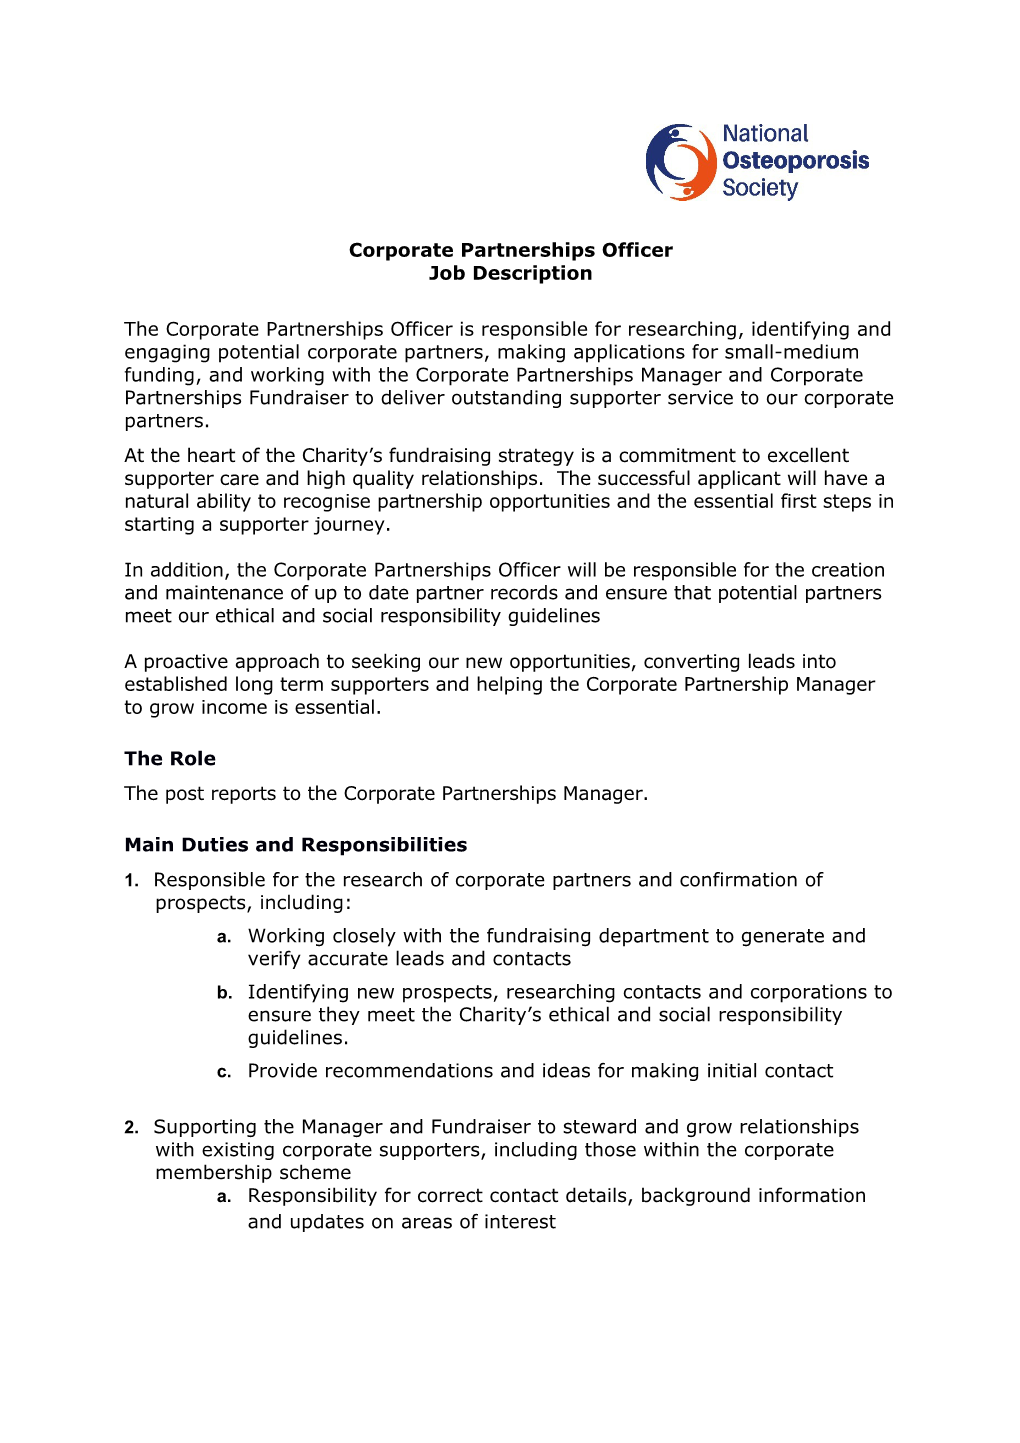 Corporate Partnerships Officer